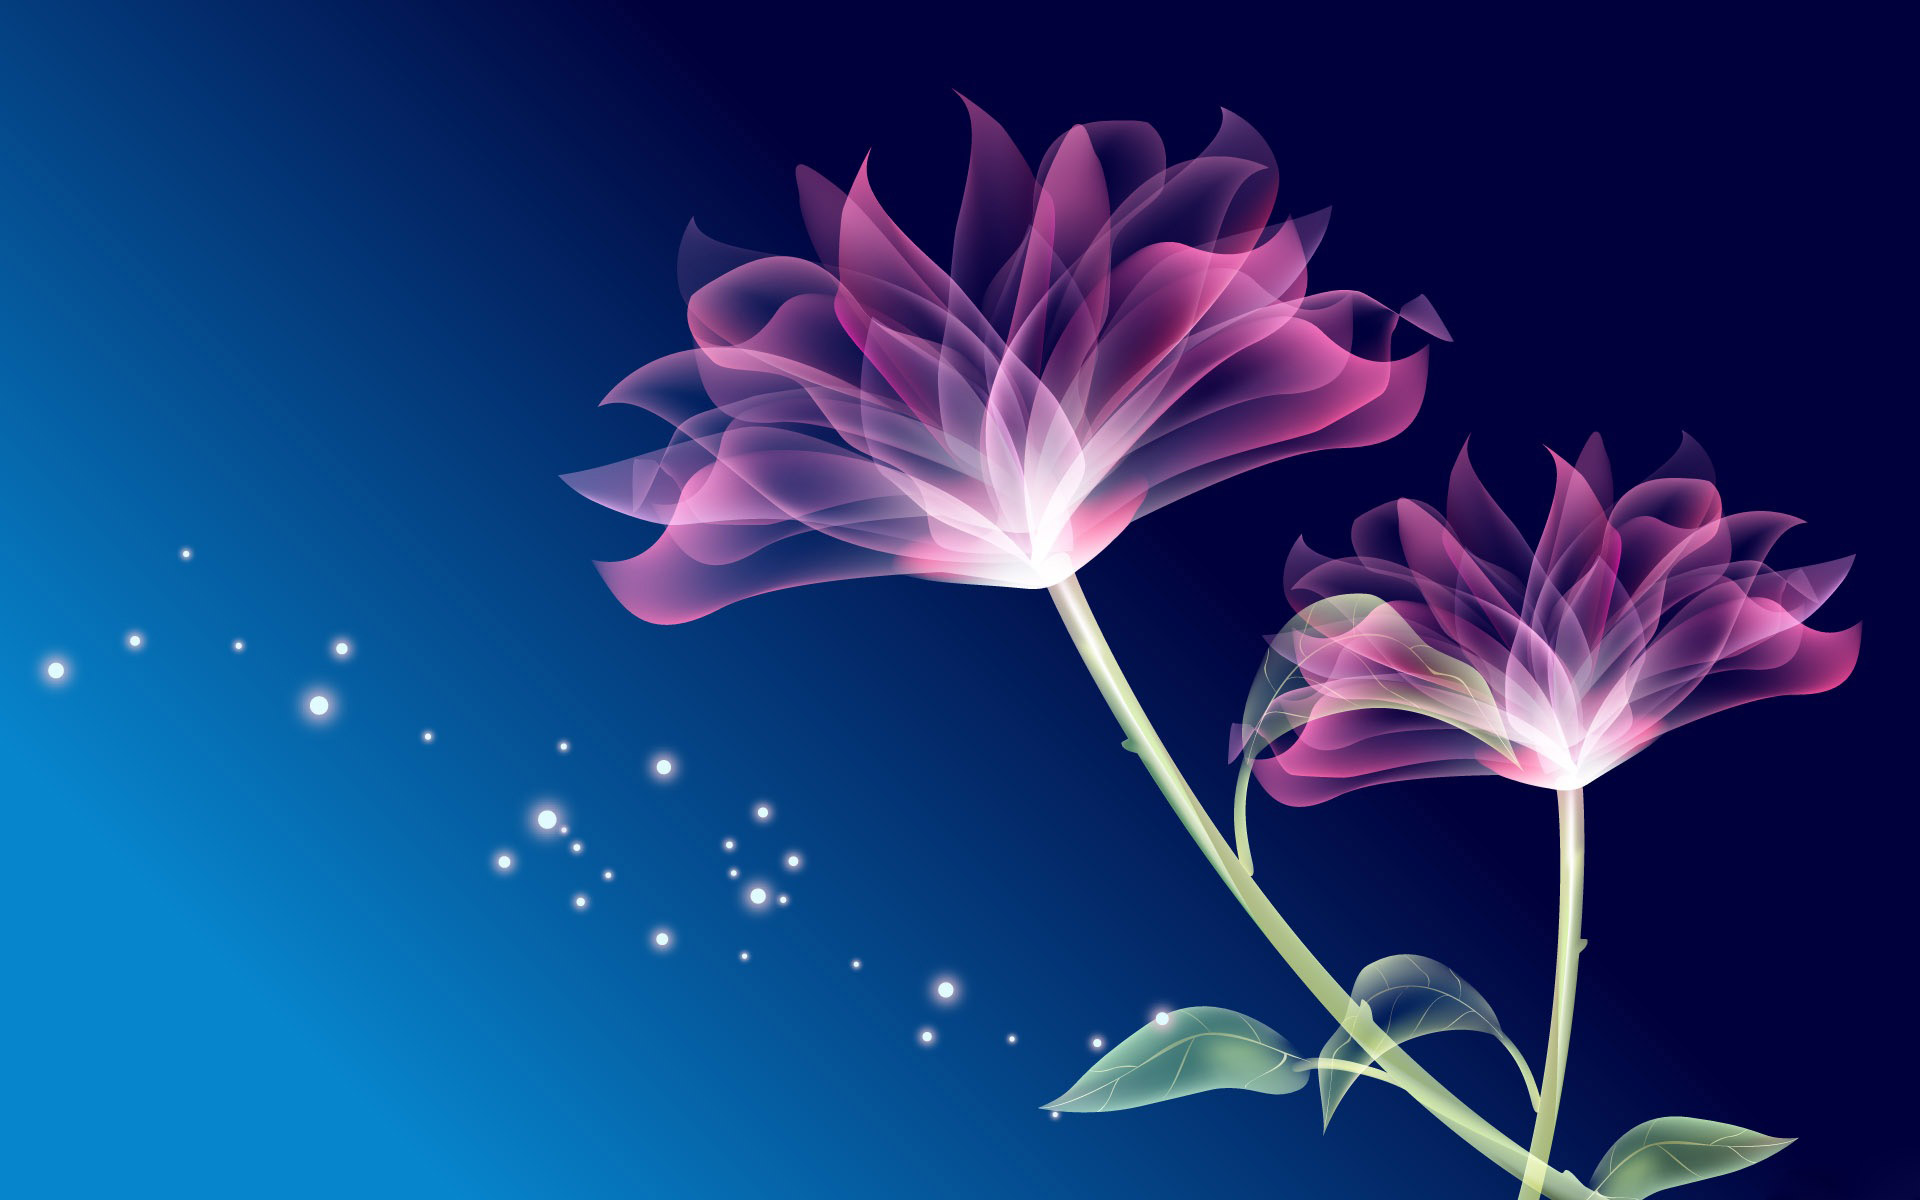 Beautiful flower images latest wallpapers free download